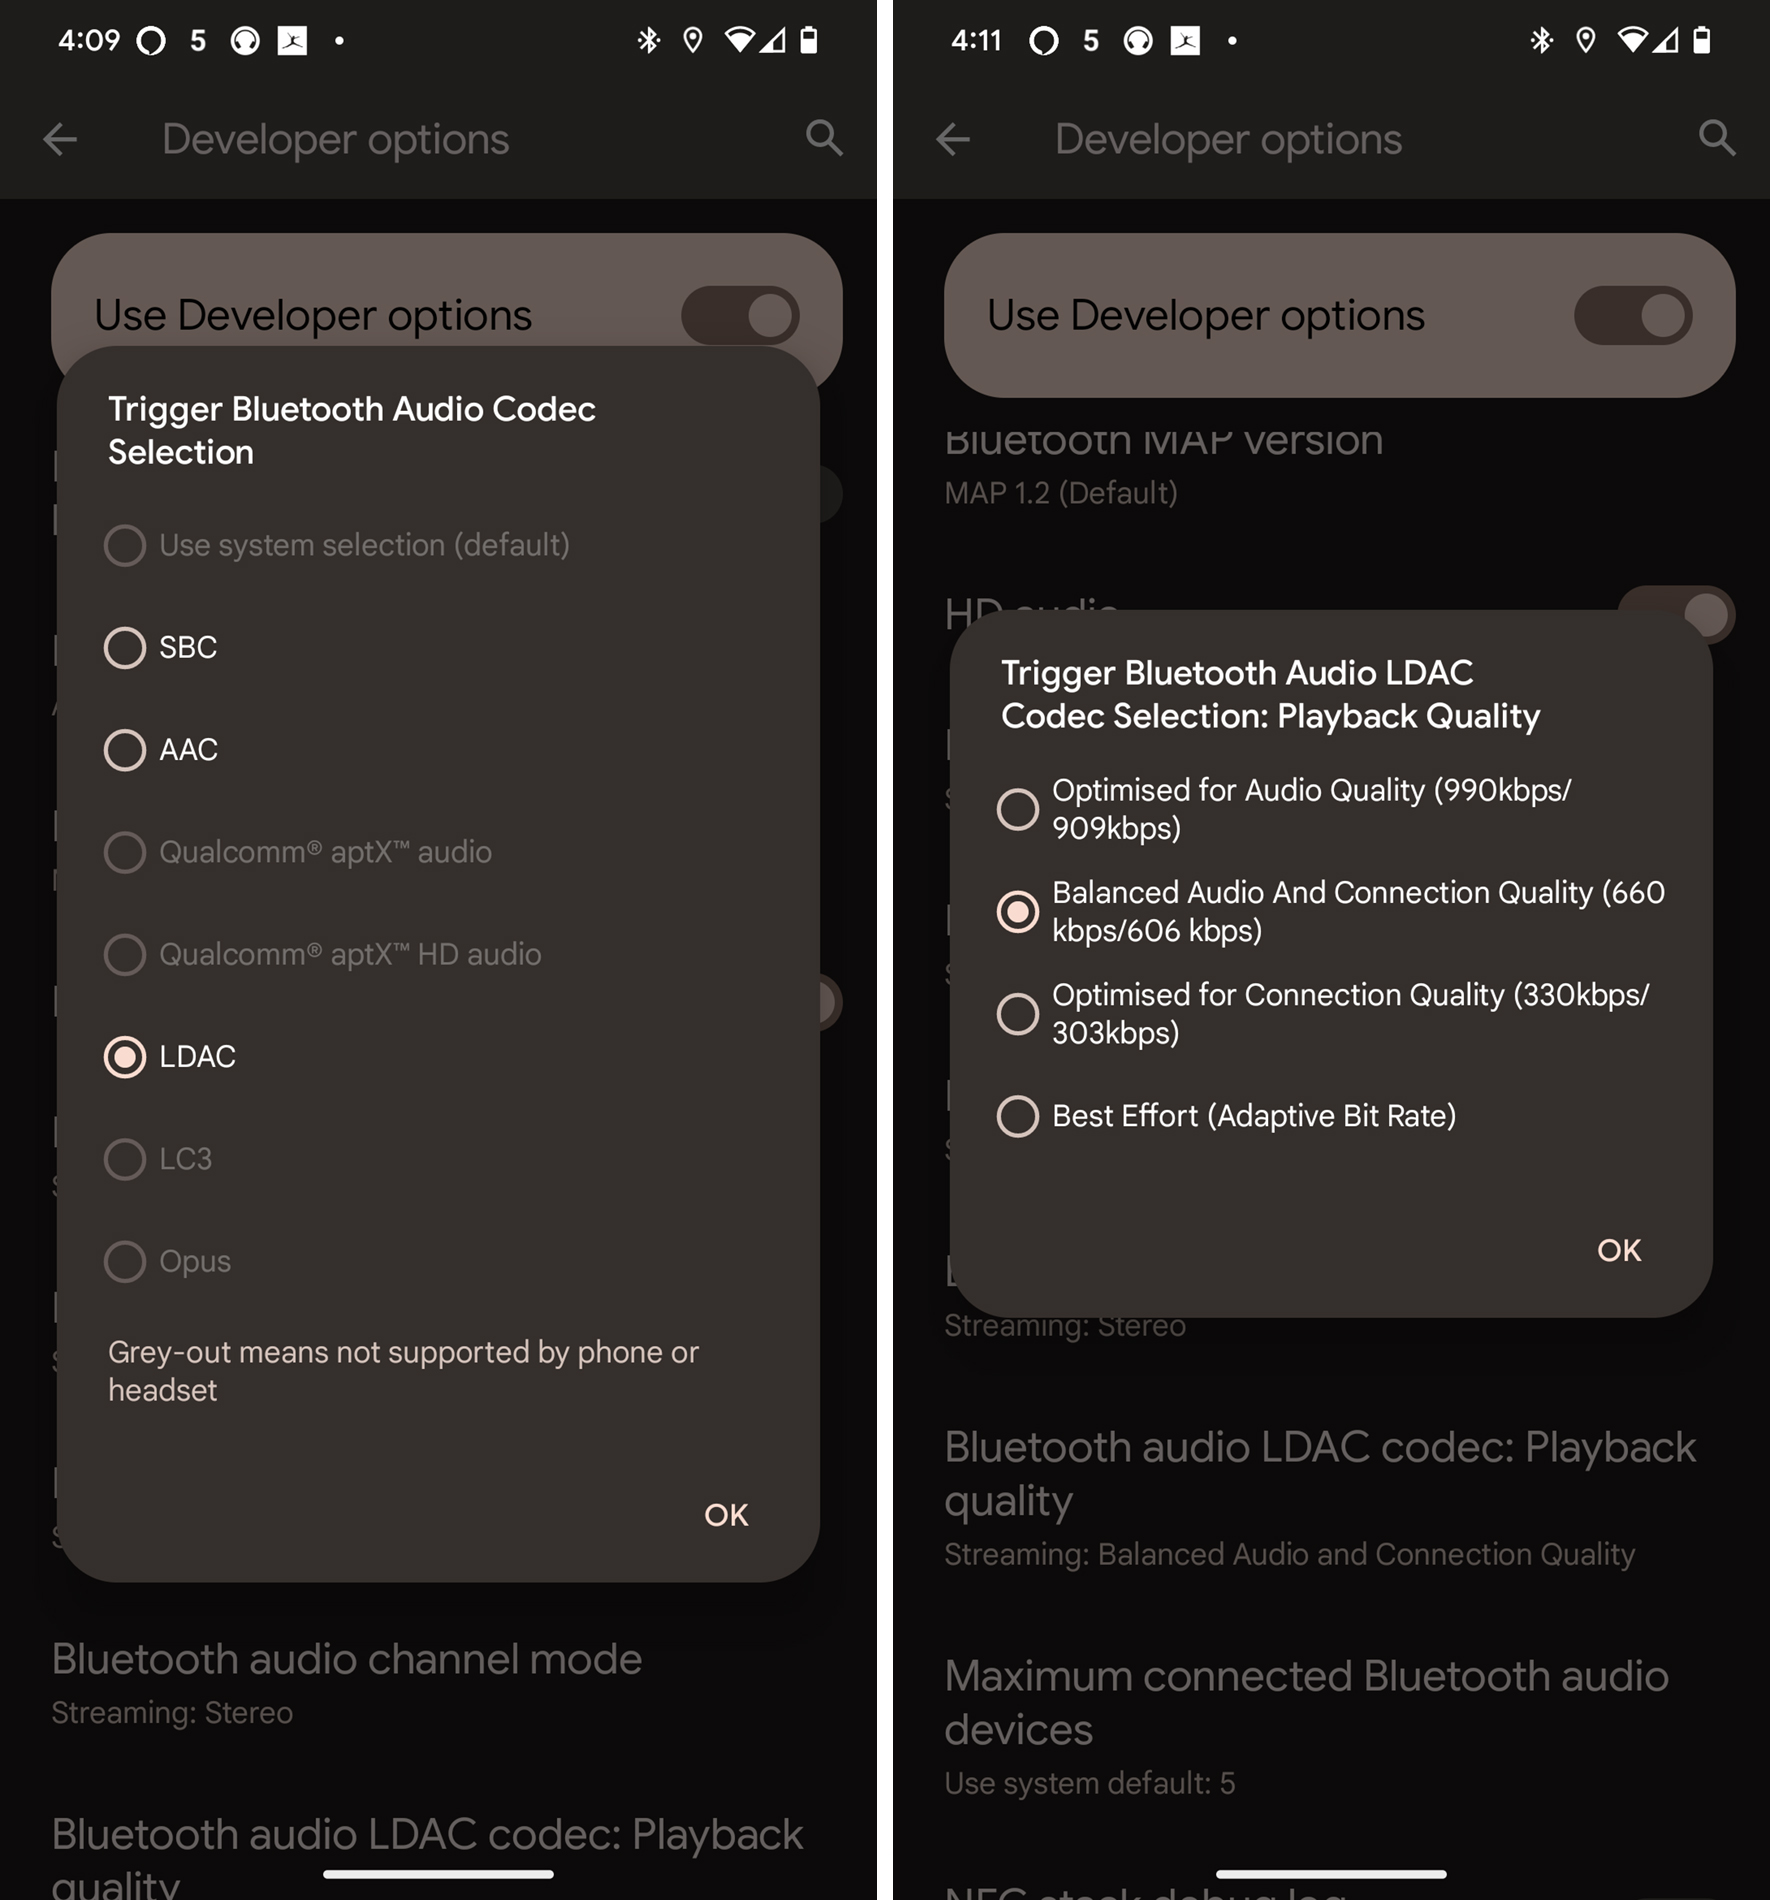 Screenshots showing Developer Options for Bluetooth codecs and quality.